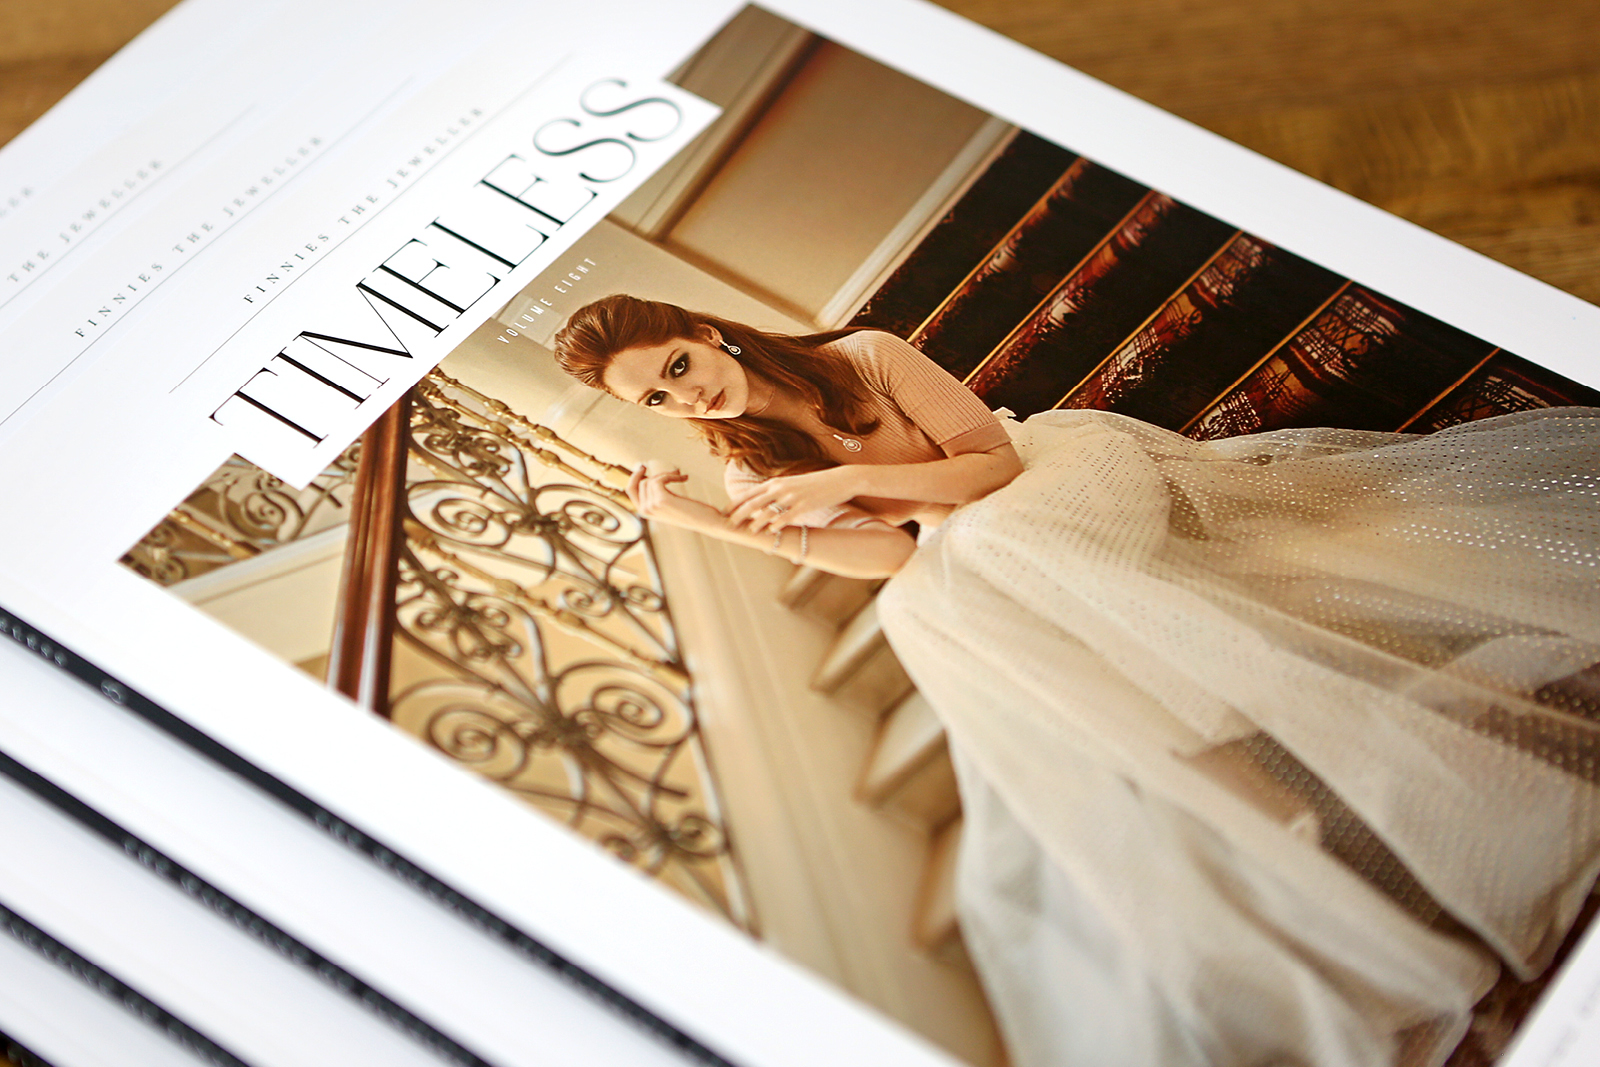 Timeless Magazine: Issue 8. Design, production and publishing of the luxury lifestyle customer magazine for Finnies the Jeweller, Aberdeen